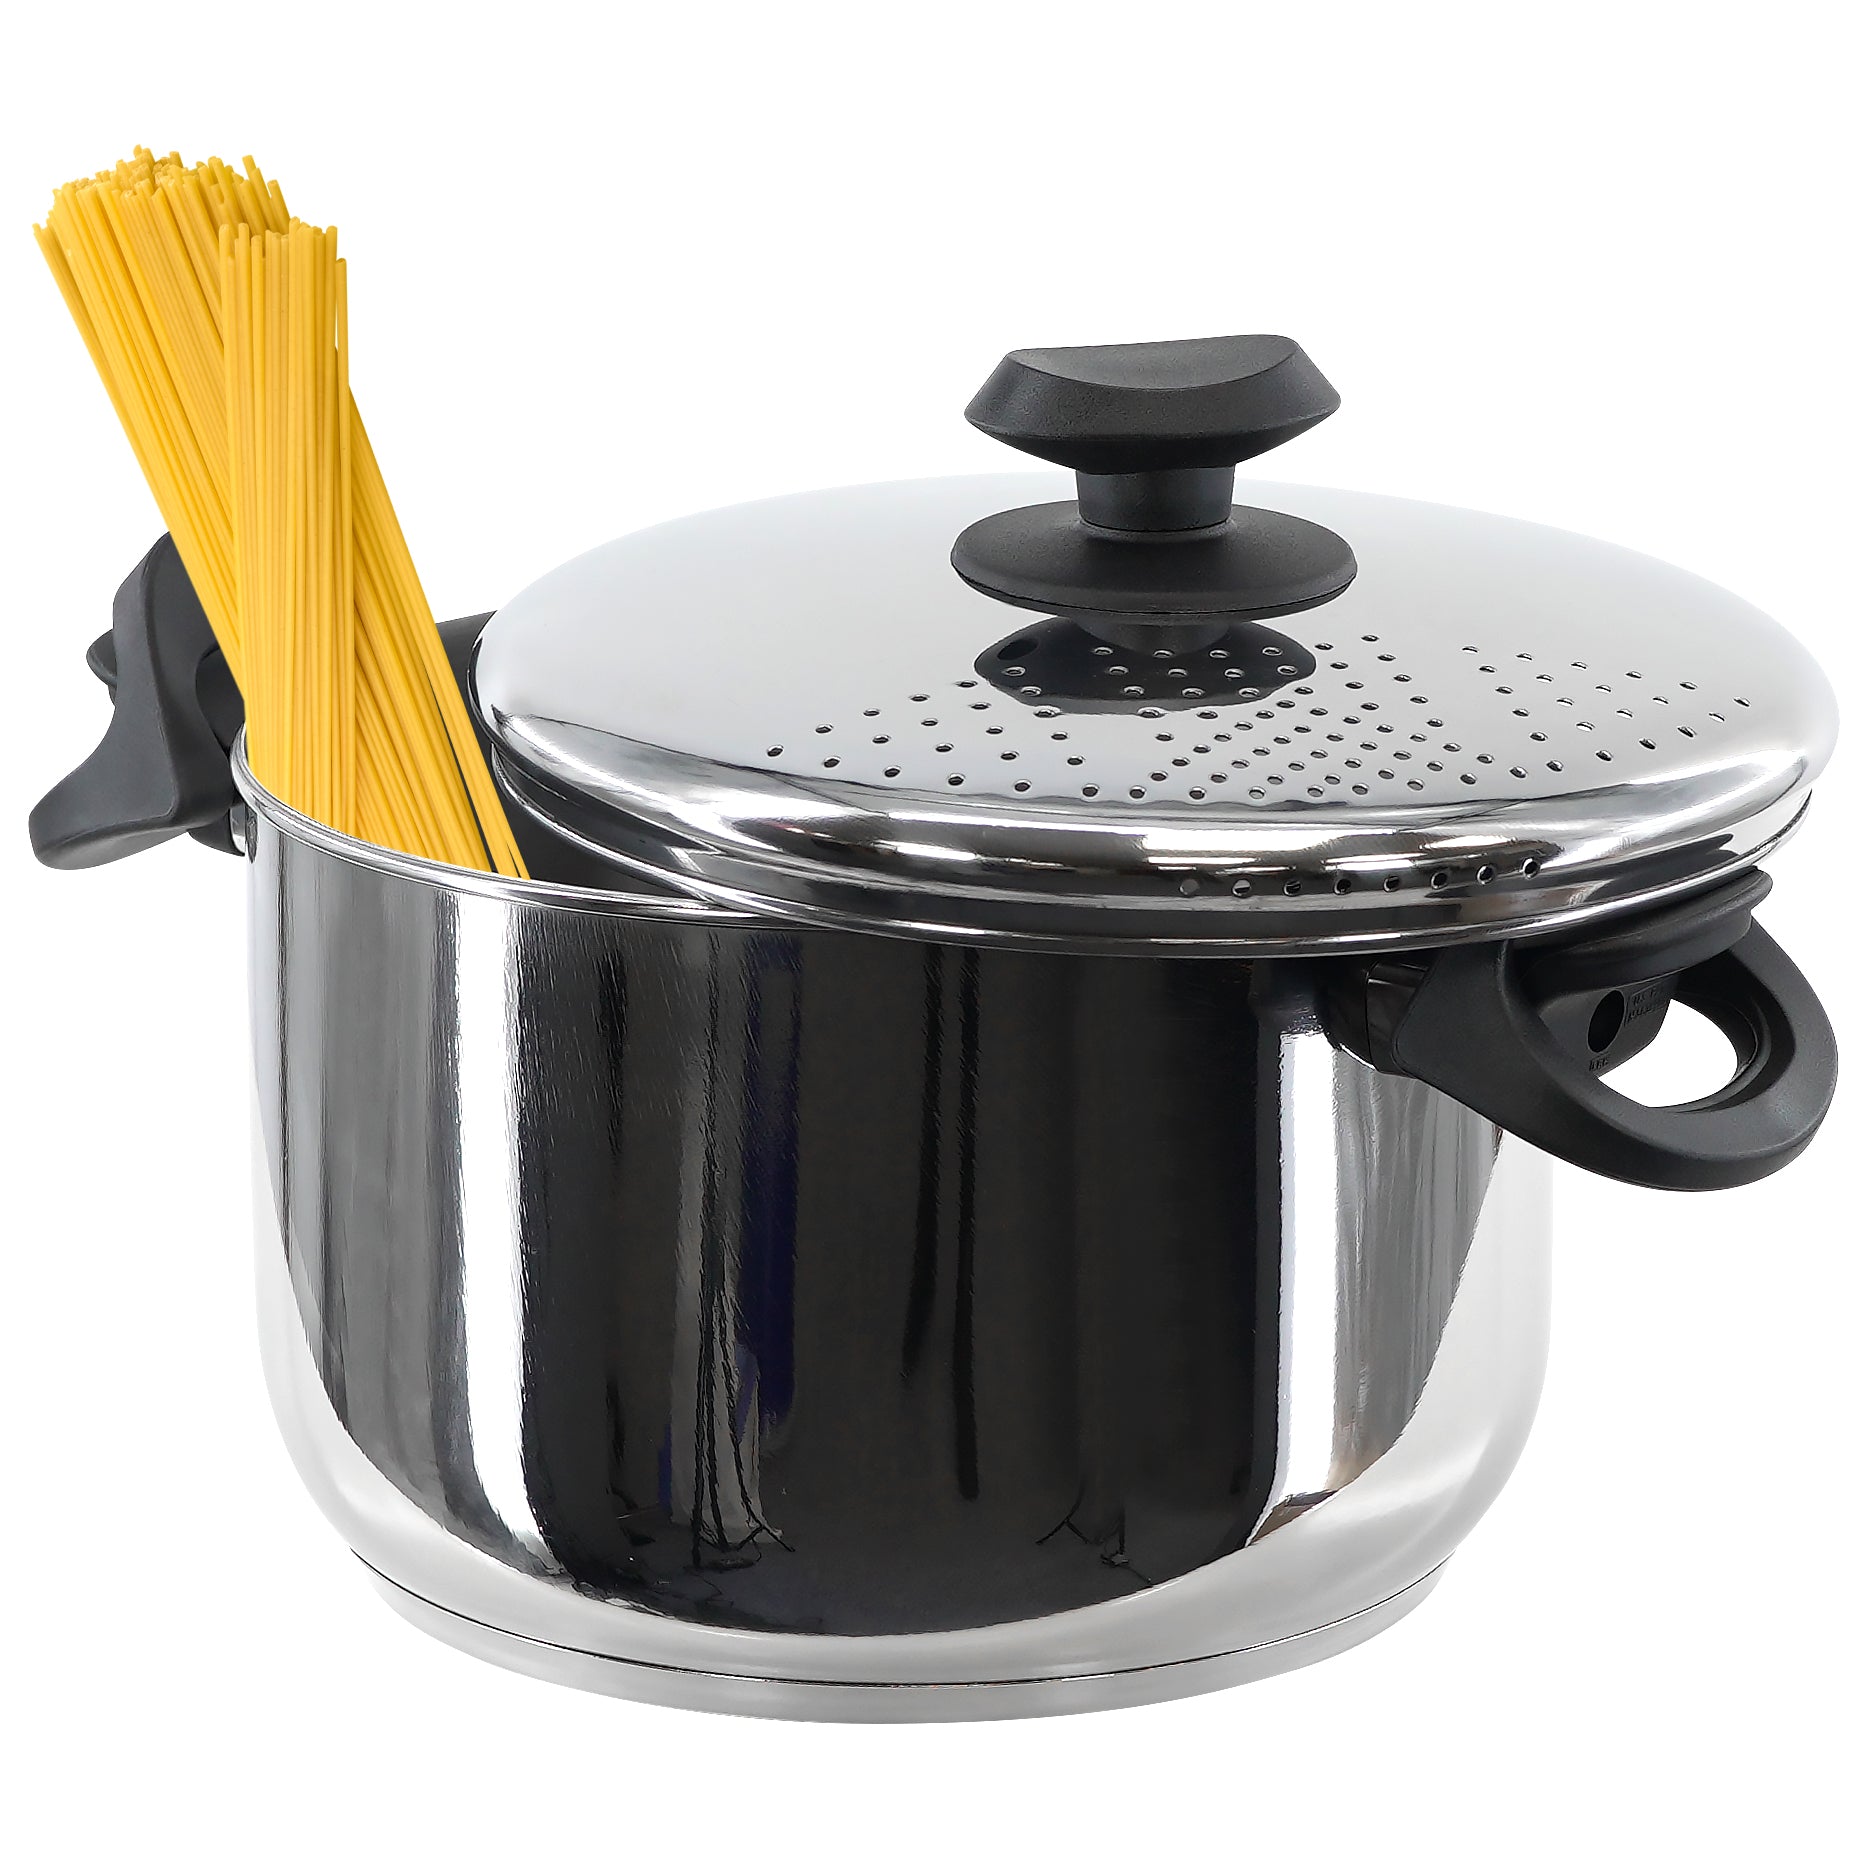 GEEZY cookingpot Stainless Steel Pasta Pot With Locking Strainer Lid